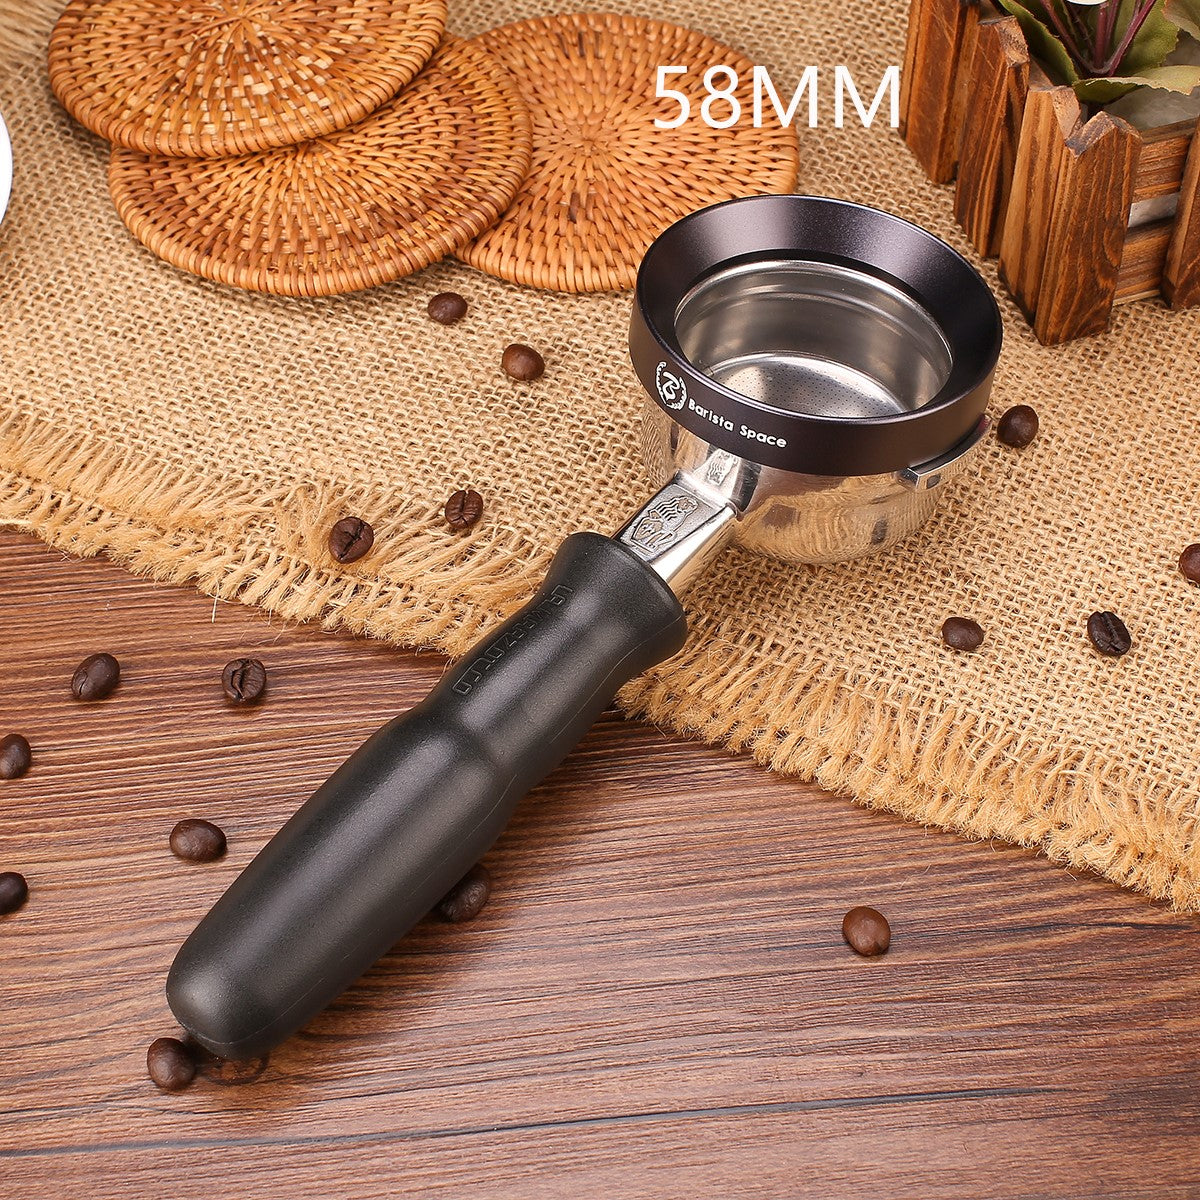 58mm 10pc Magnetic Coffee Funnel